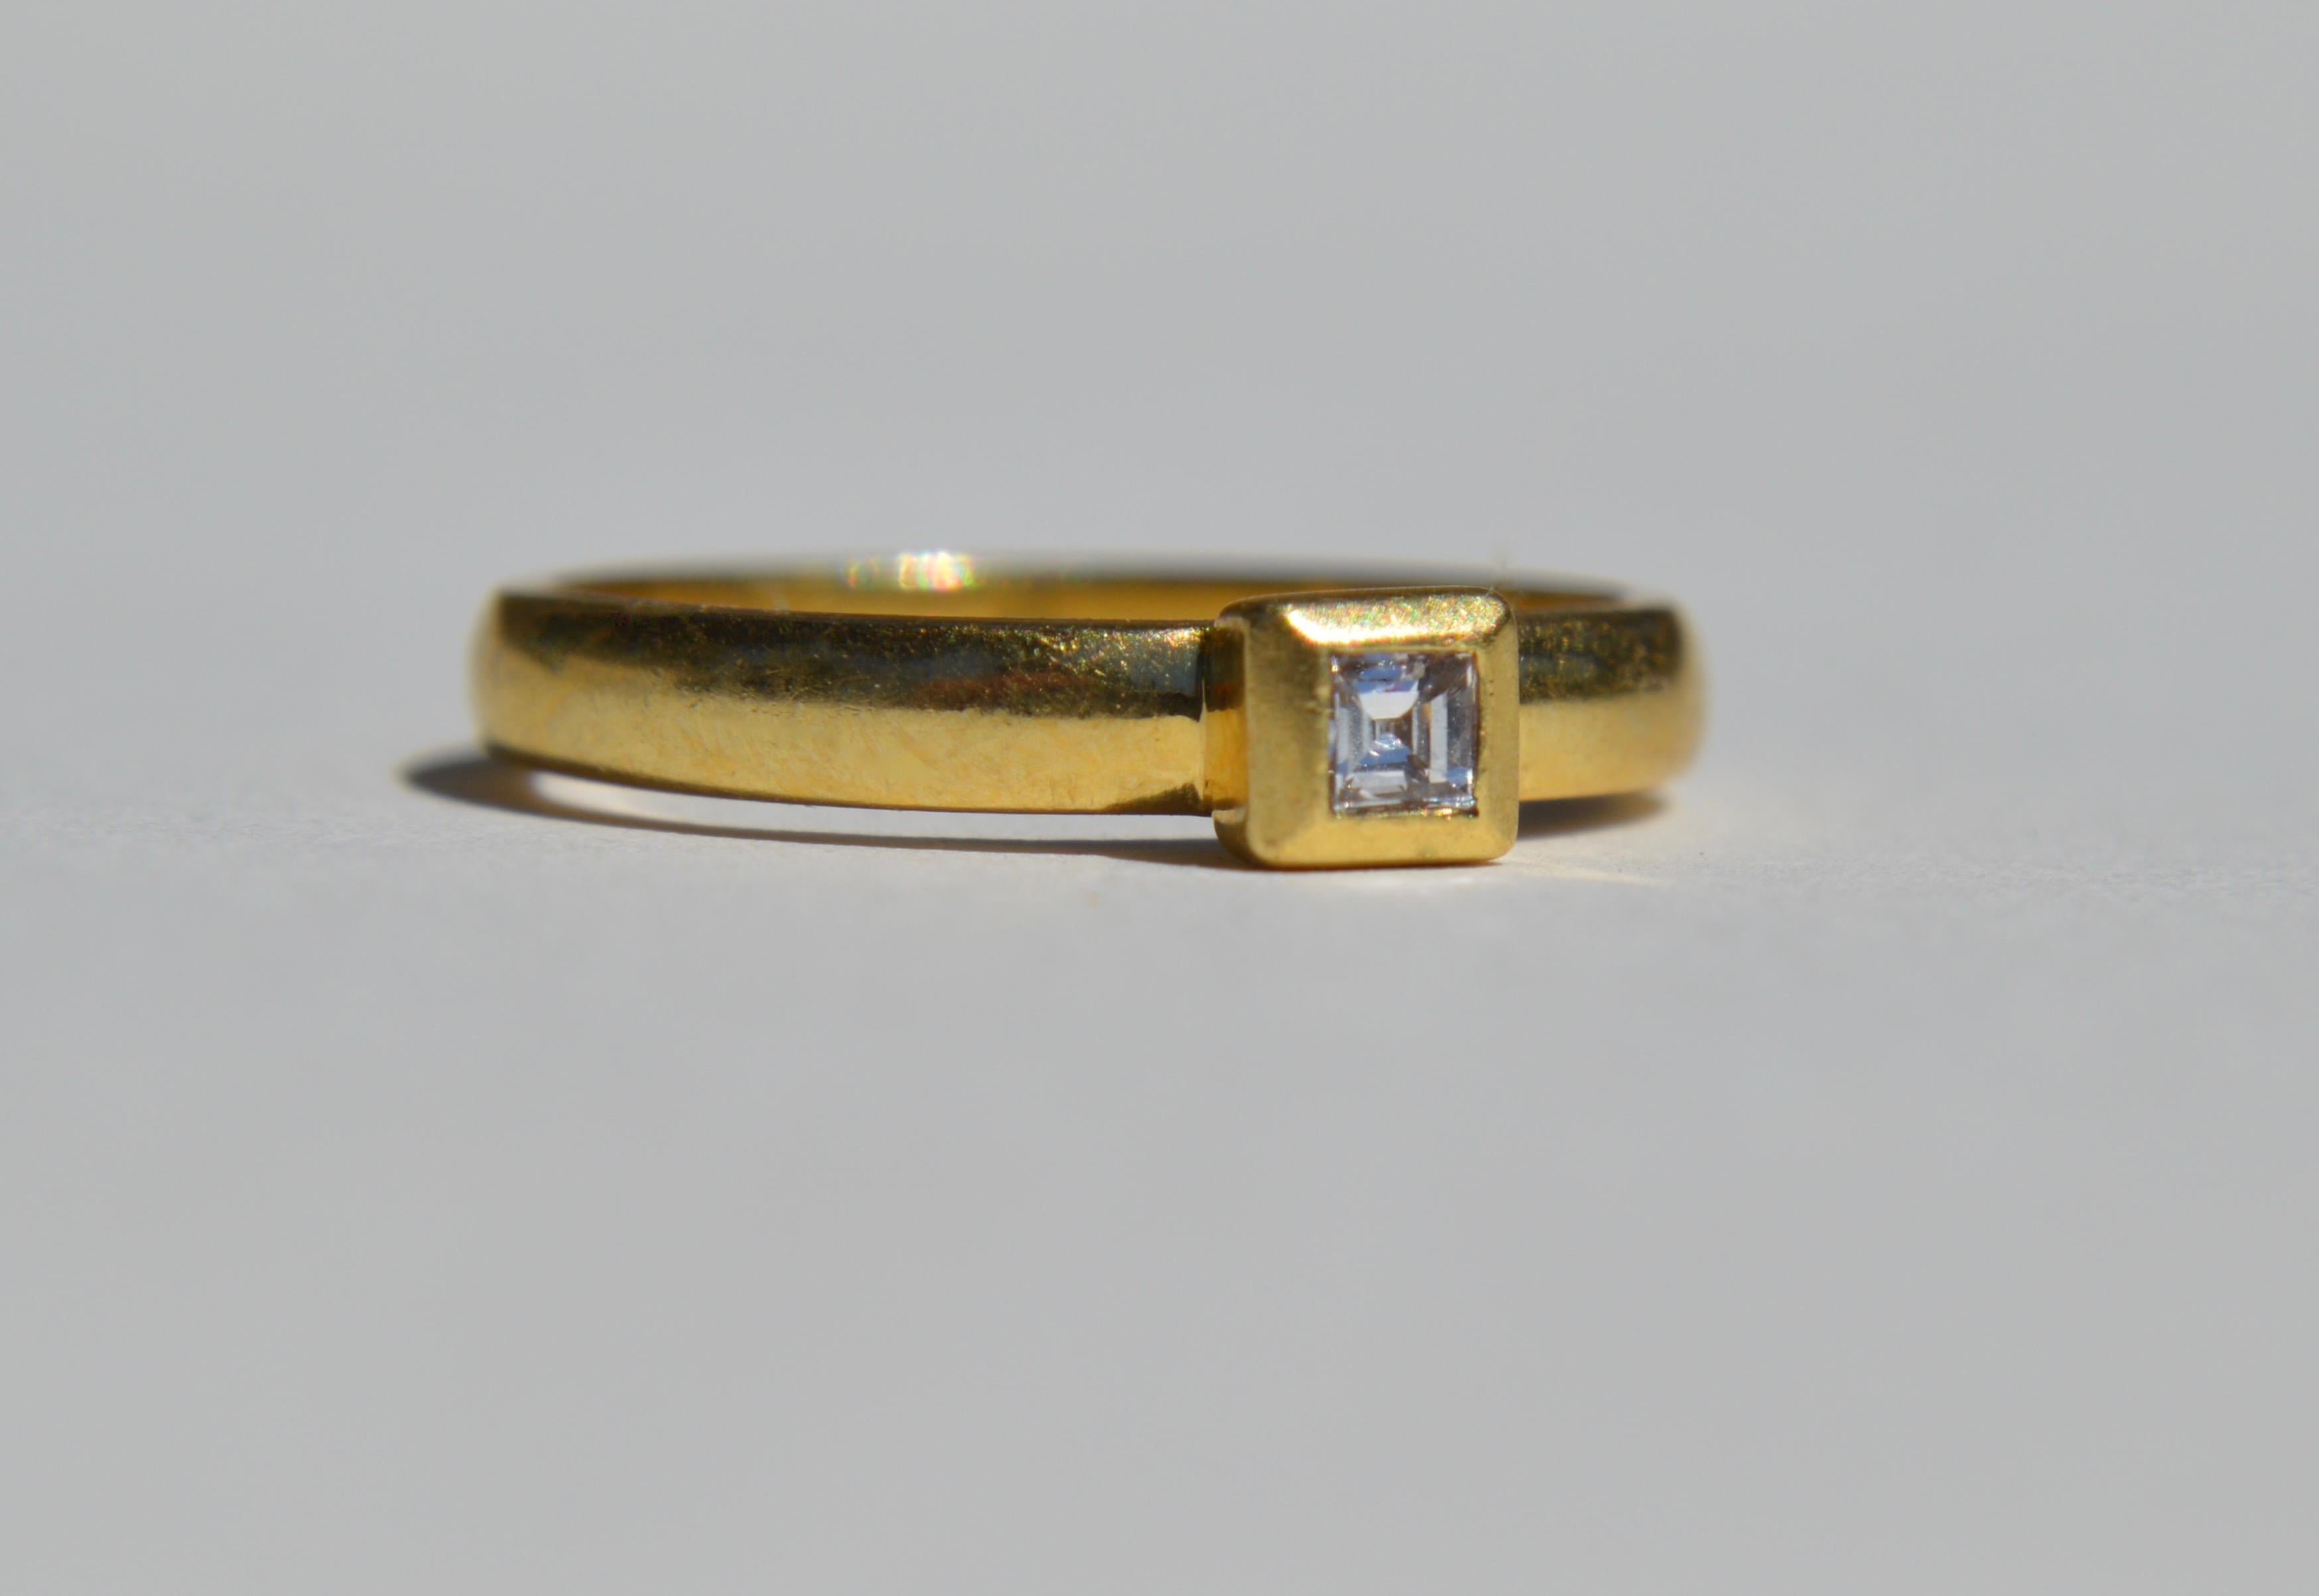 Beautiful vintage circa 1960s .10 carat carre cut diamond ring in 18K yellow gold. In good condition. Size 6.5, can be resized by a jeweler. Diamond has been graded as VS1 (very slightly included), color E (near colorless). Perfect for a minimal